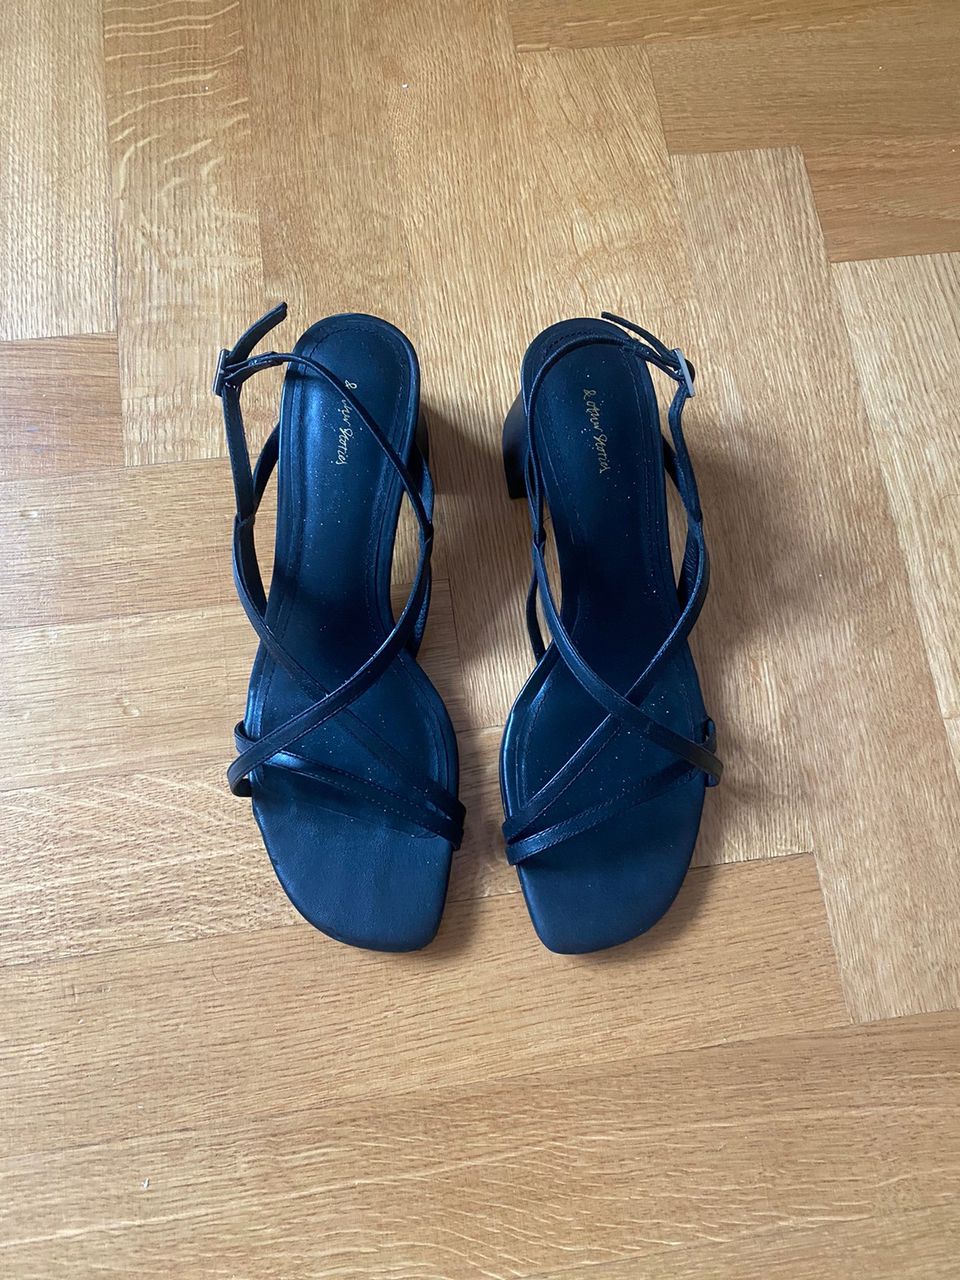 & Other Stories strappy leather sandals, size 38